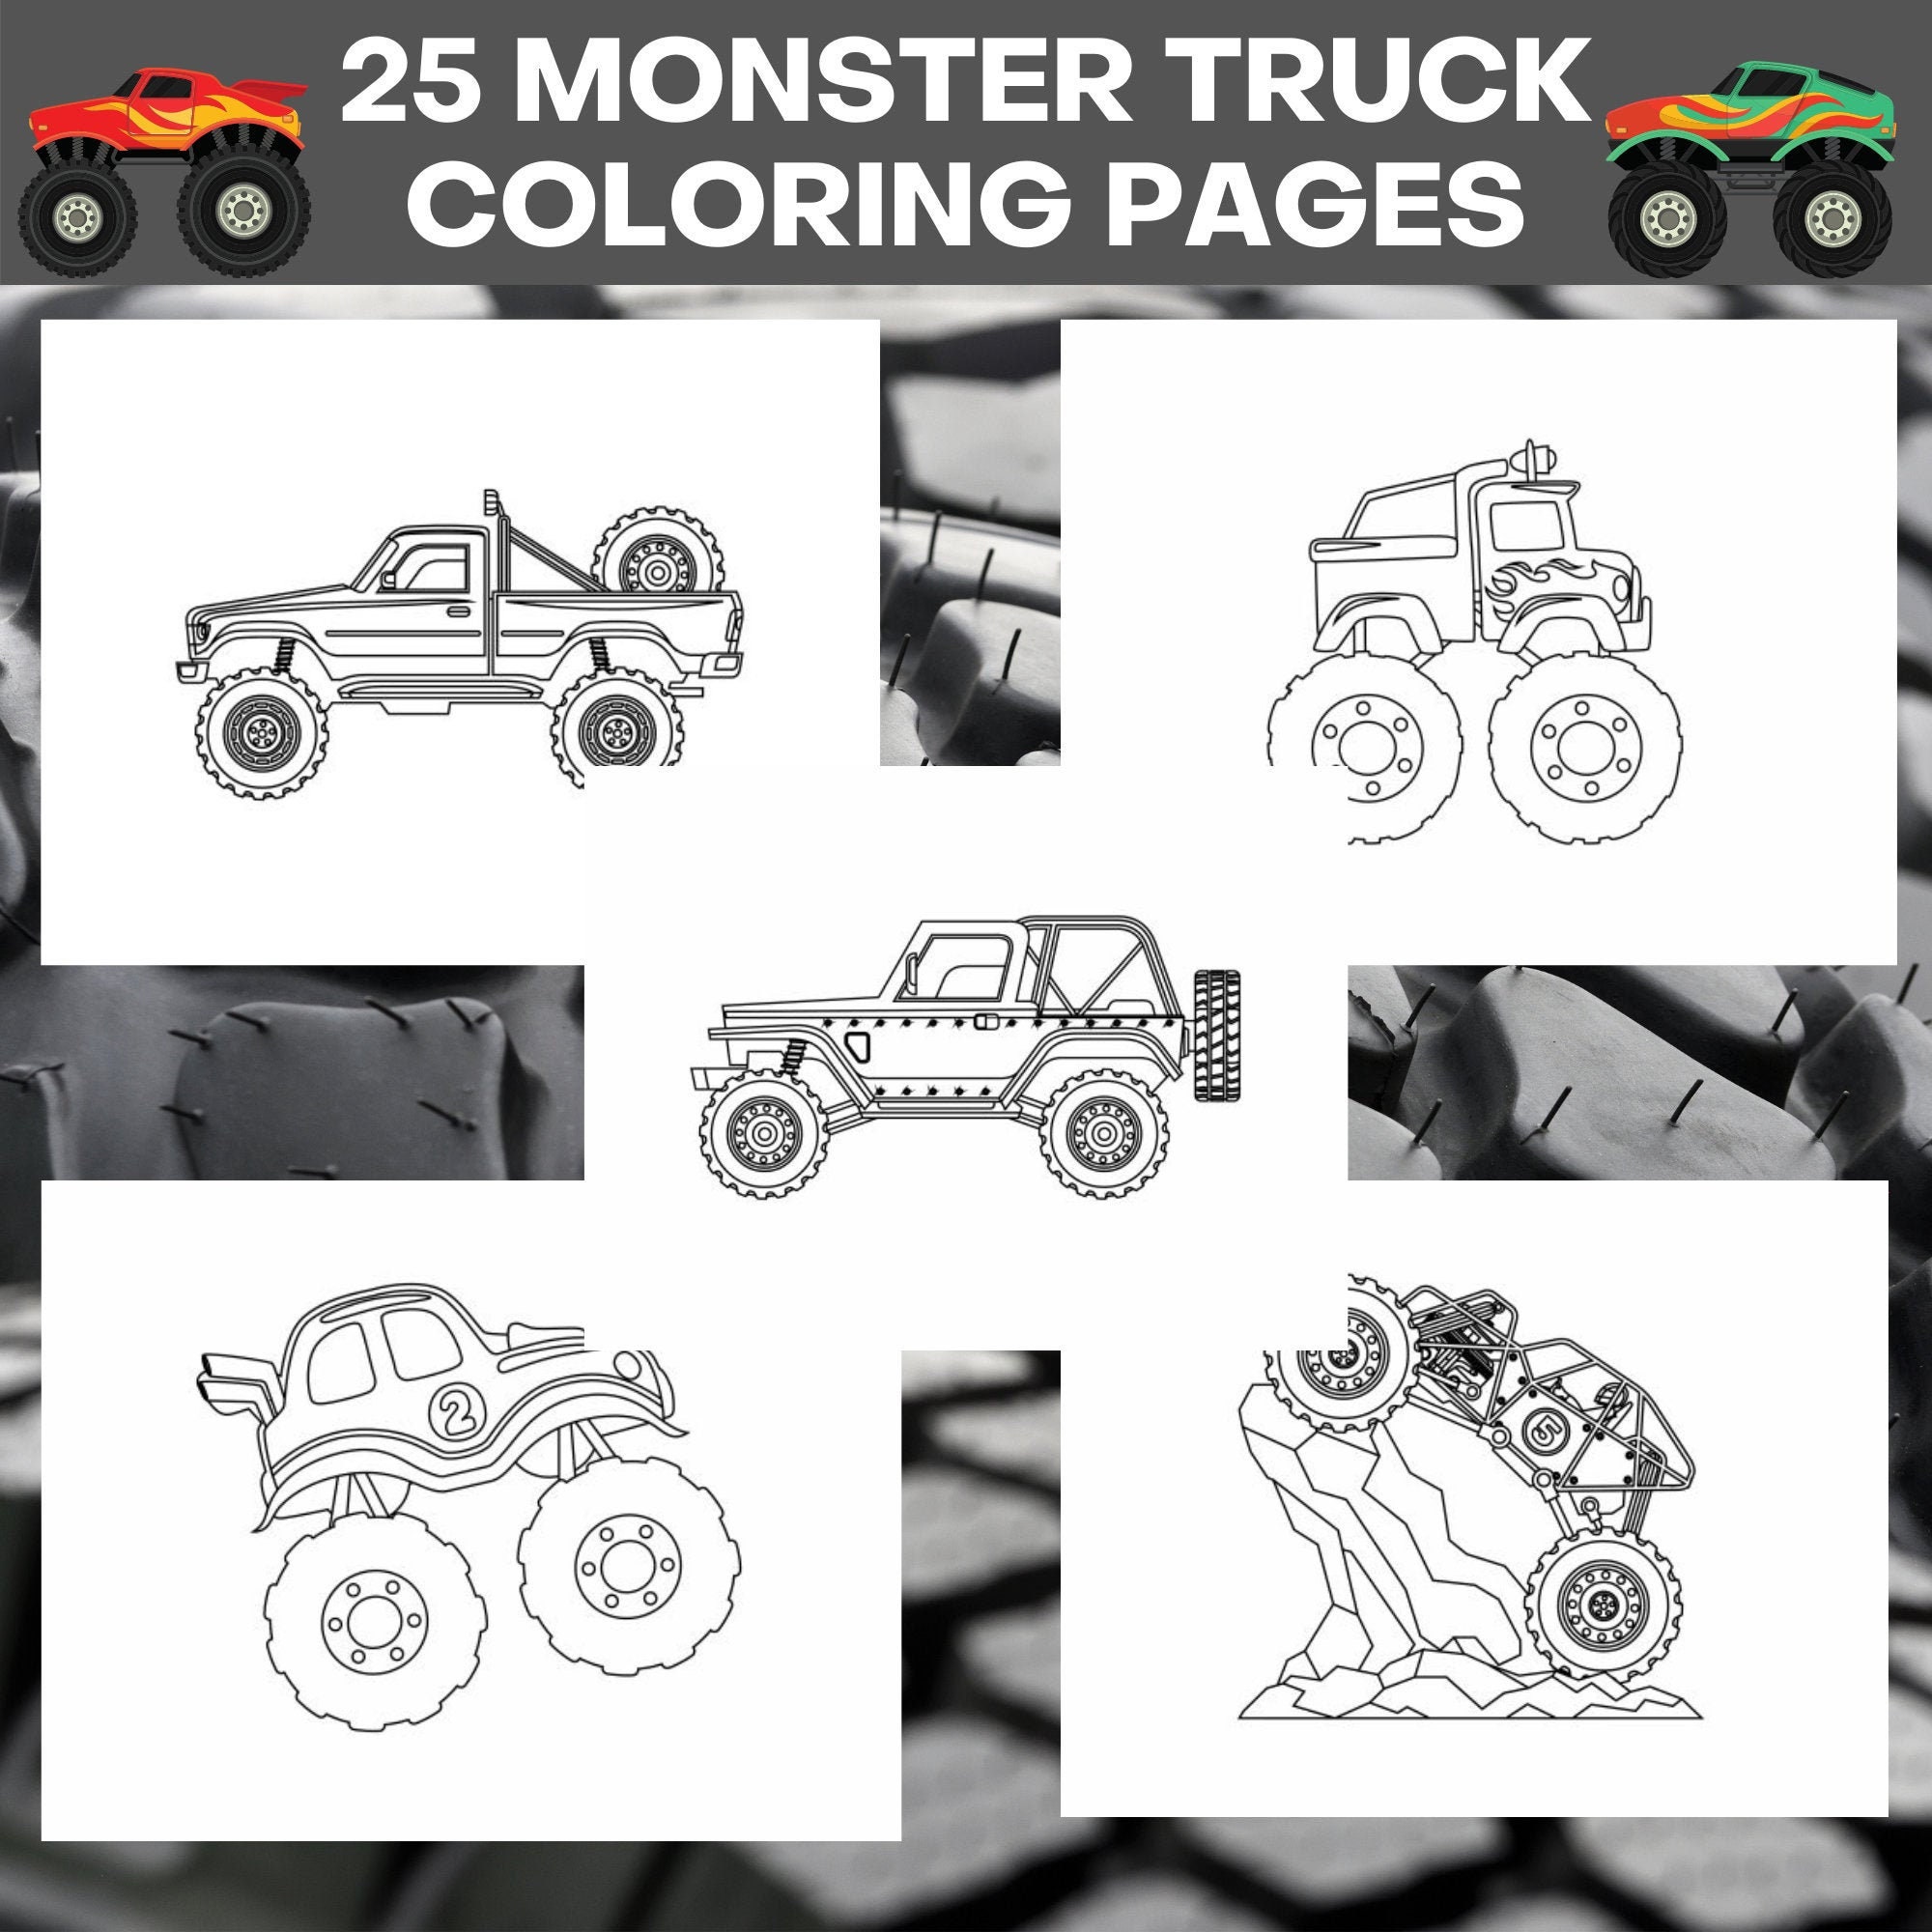 Monster Truck Coloring Book for Kids: Simple Coloring Book for